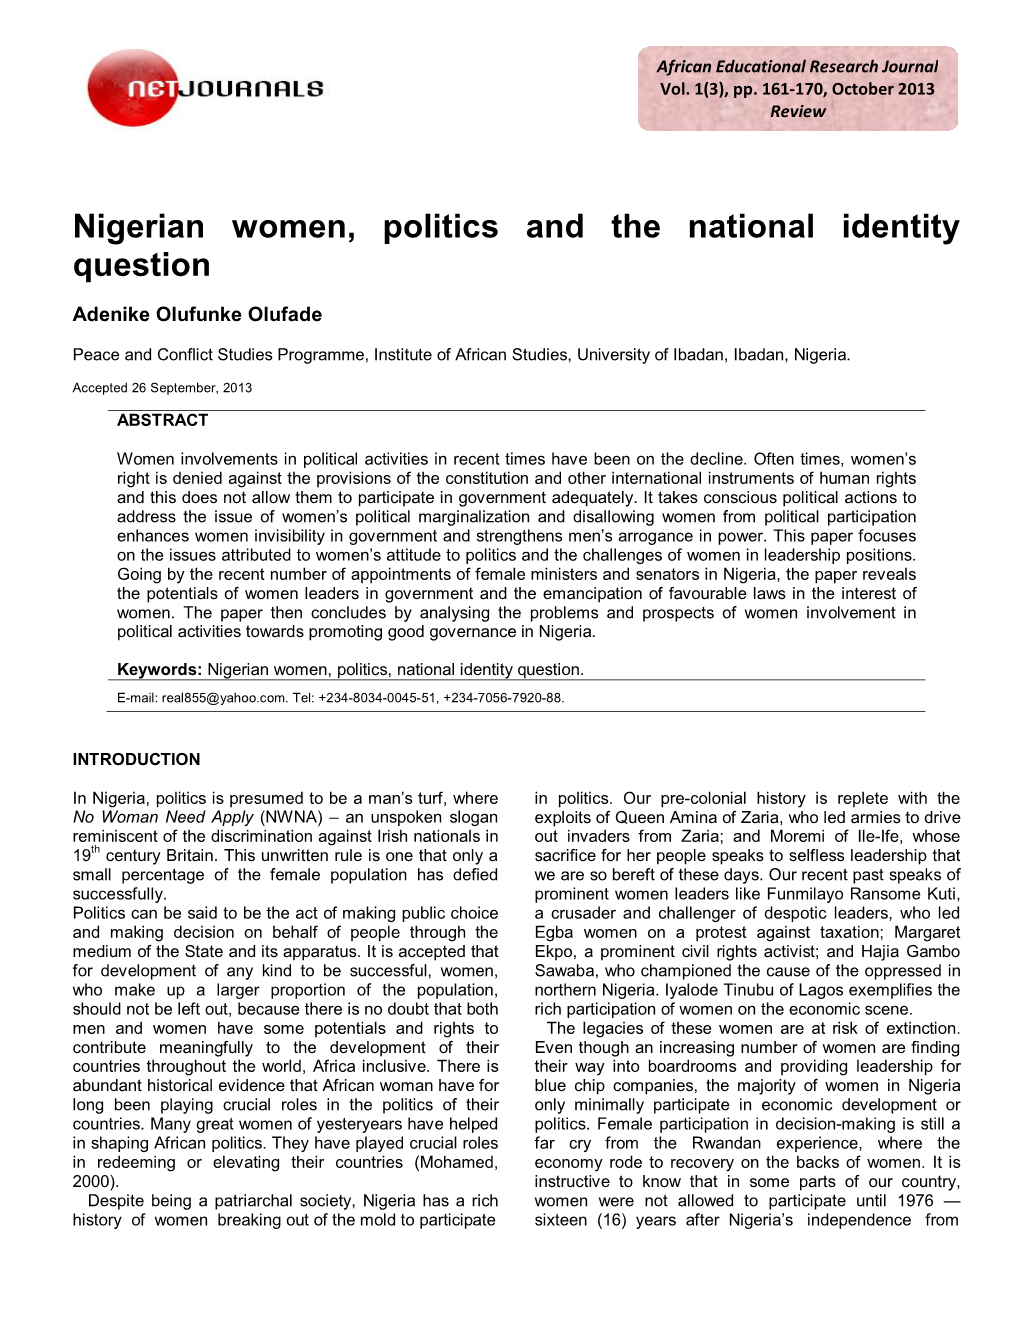 Nigerian Women, Politics and the National Identity Question